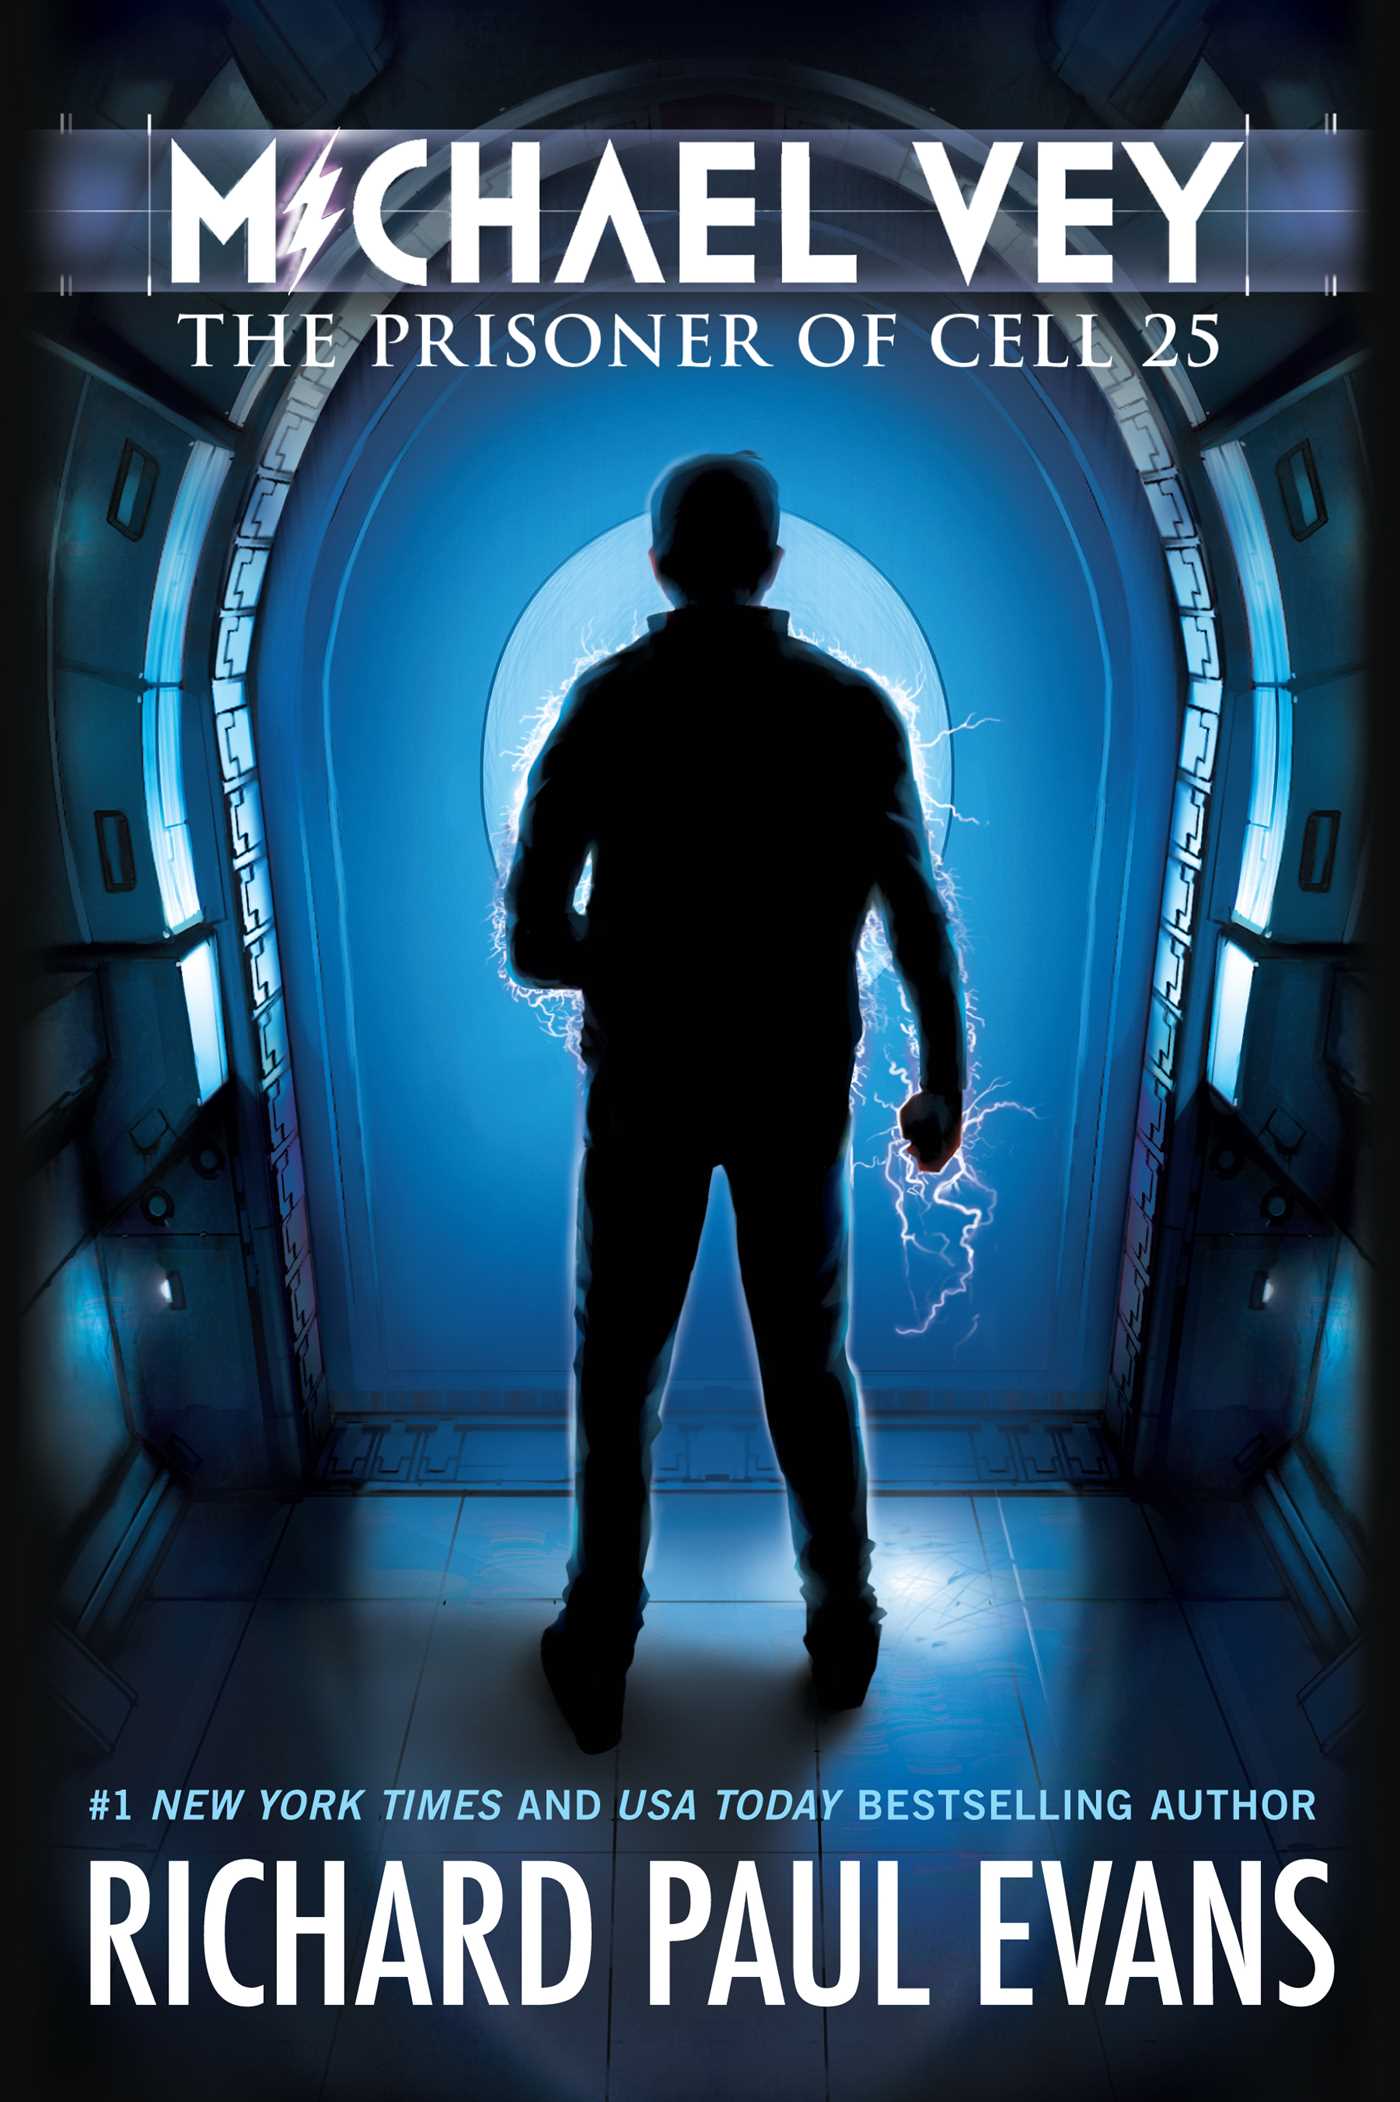 Michael Vey The Prisoner of Cell 25 cover image